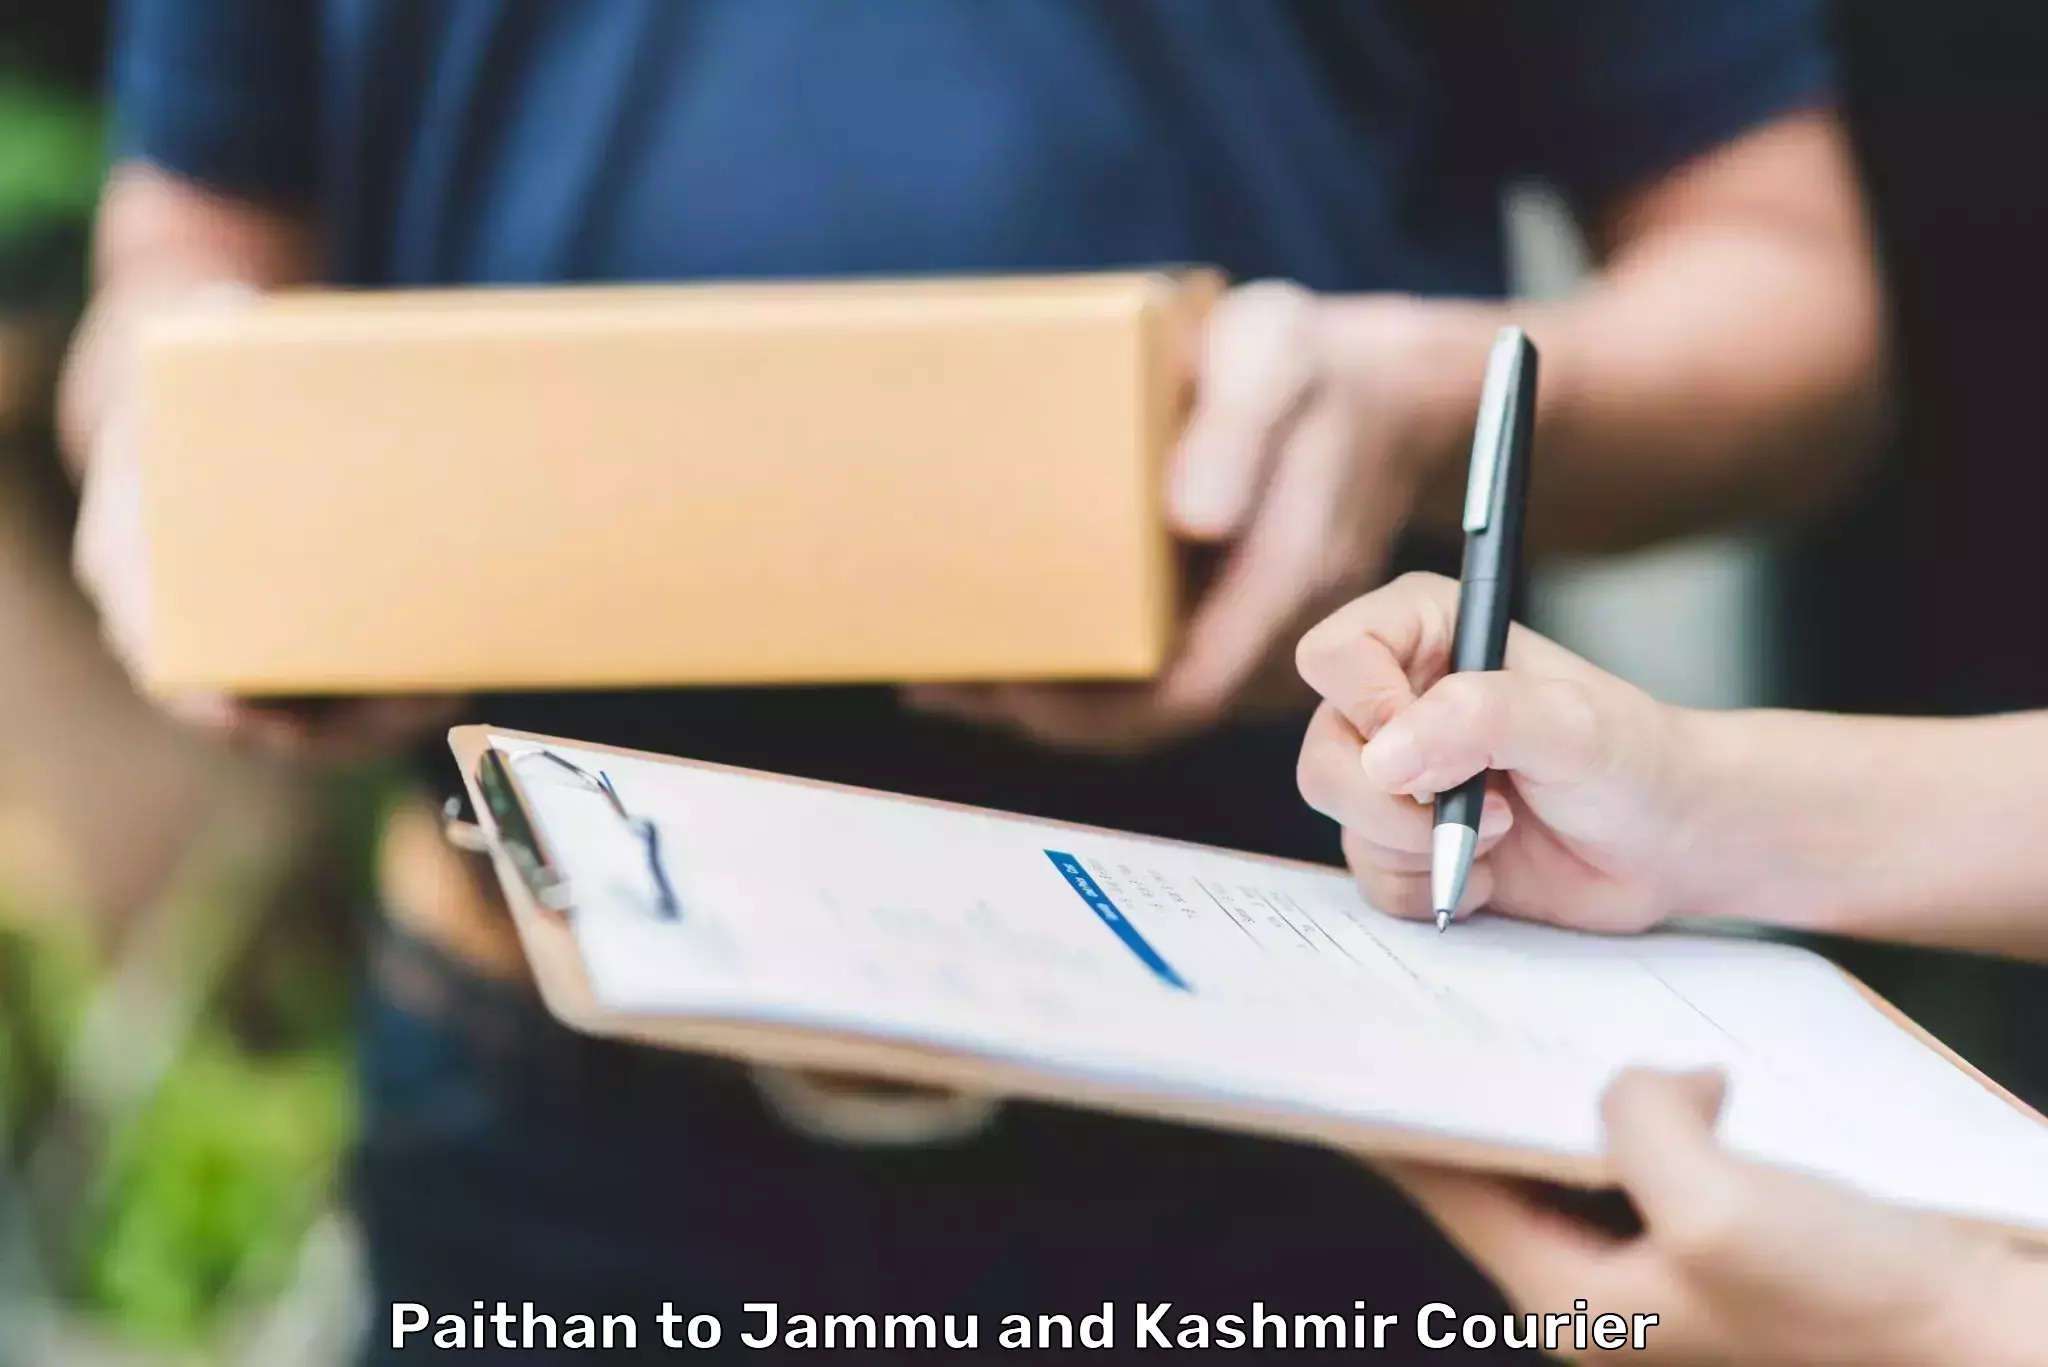 Parcel service for businesses Paithan to Jammu and Kashmir